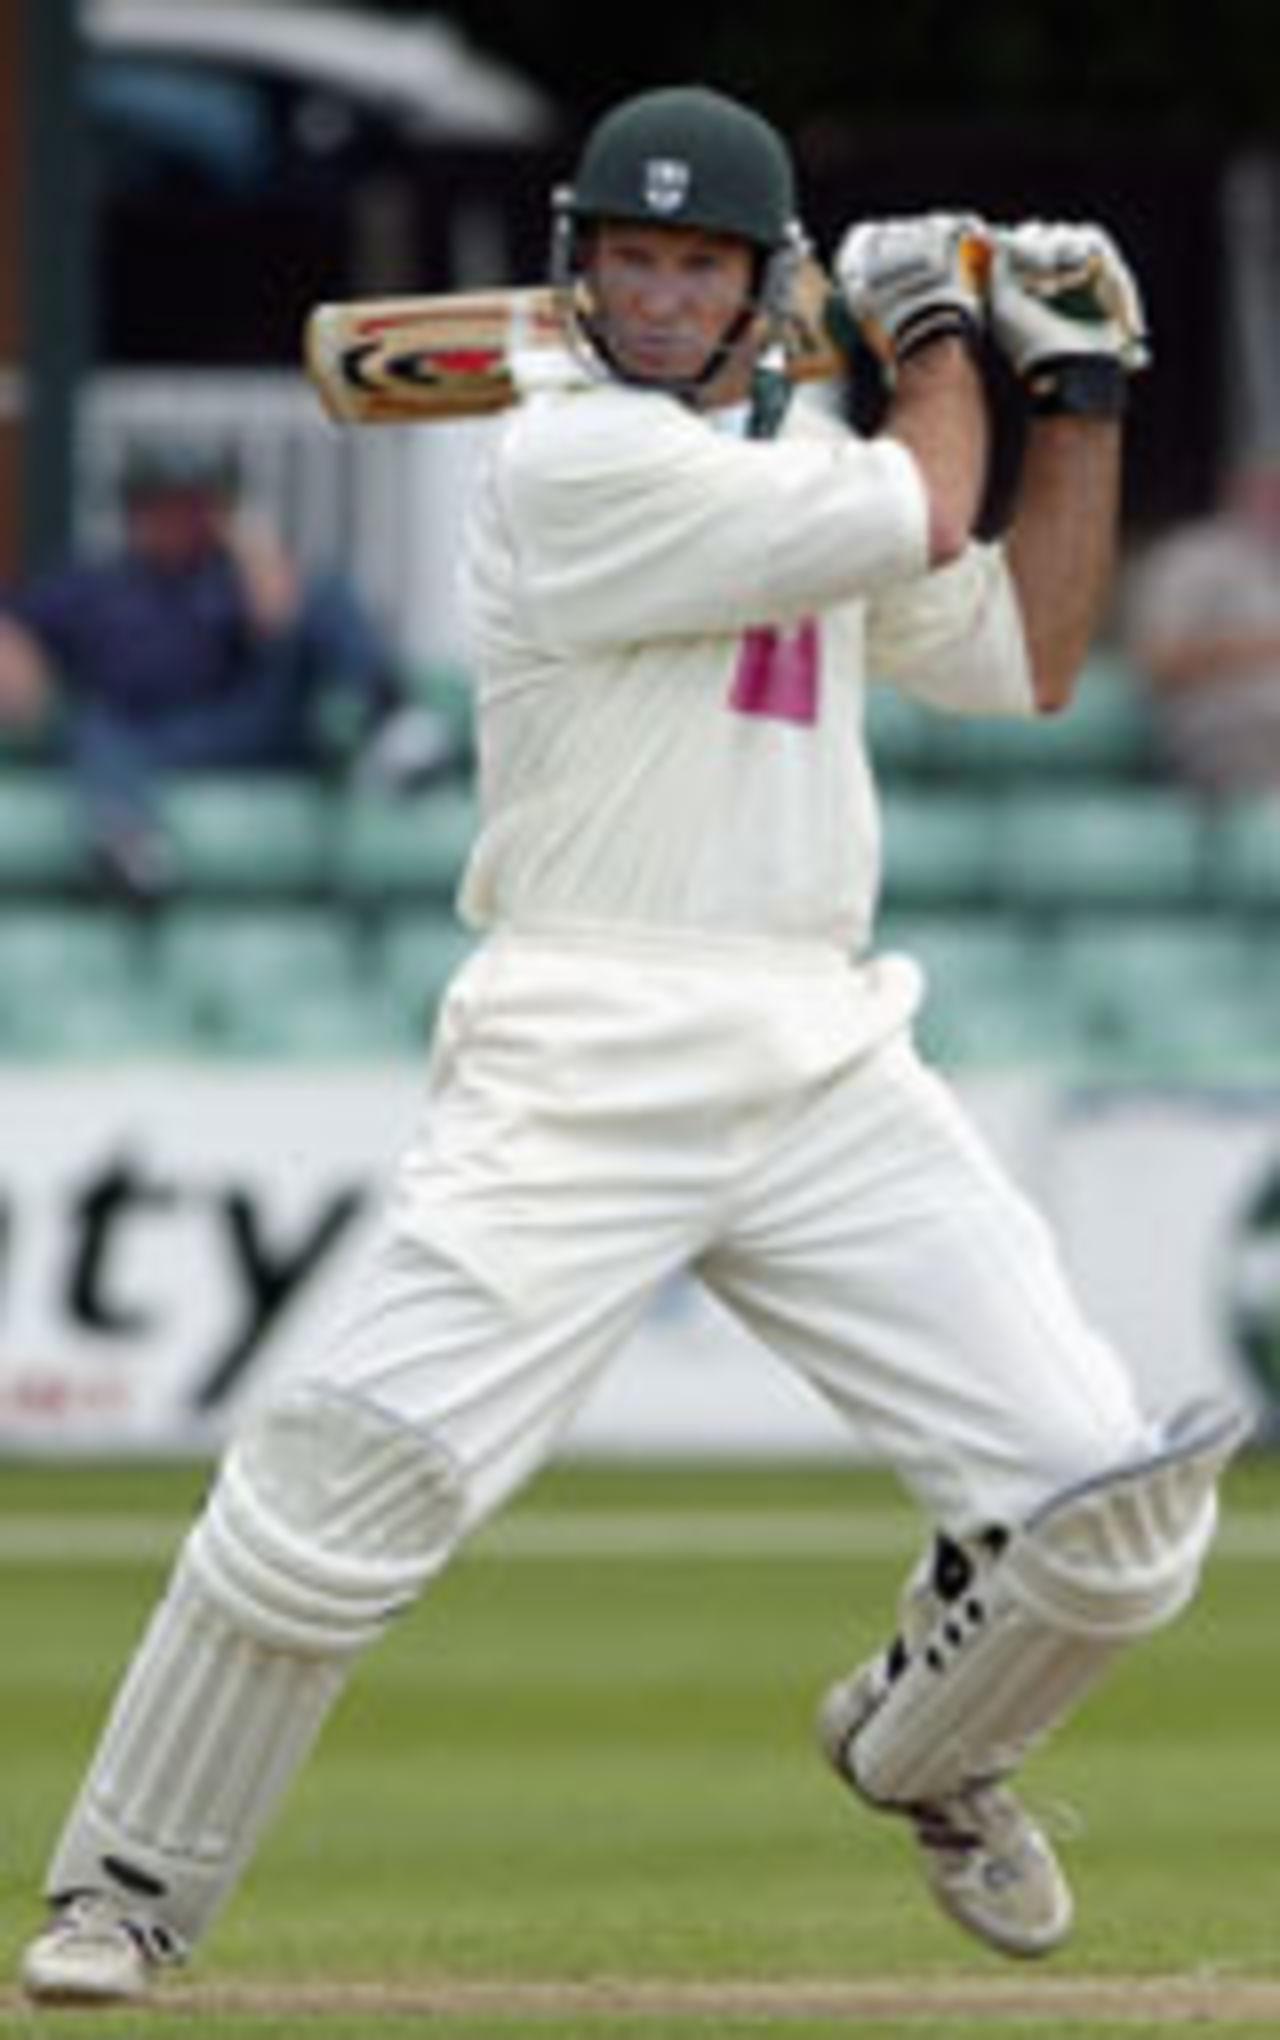 Graeme Hick on the attack for Worcestershire v Gloucestershire, Worcester, May 18, 2004